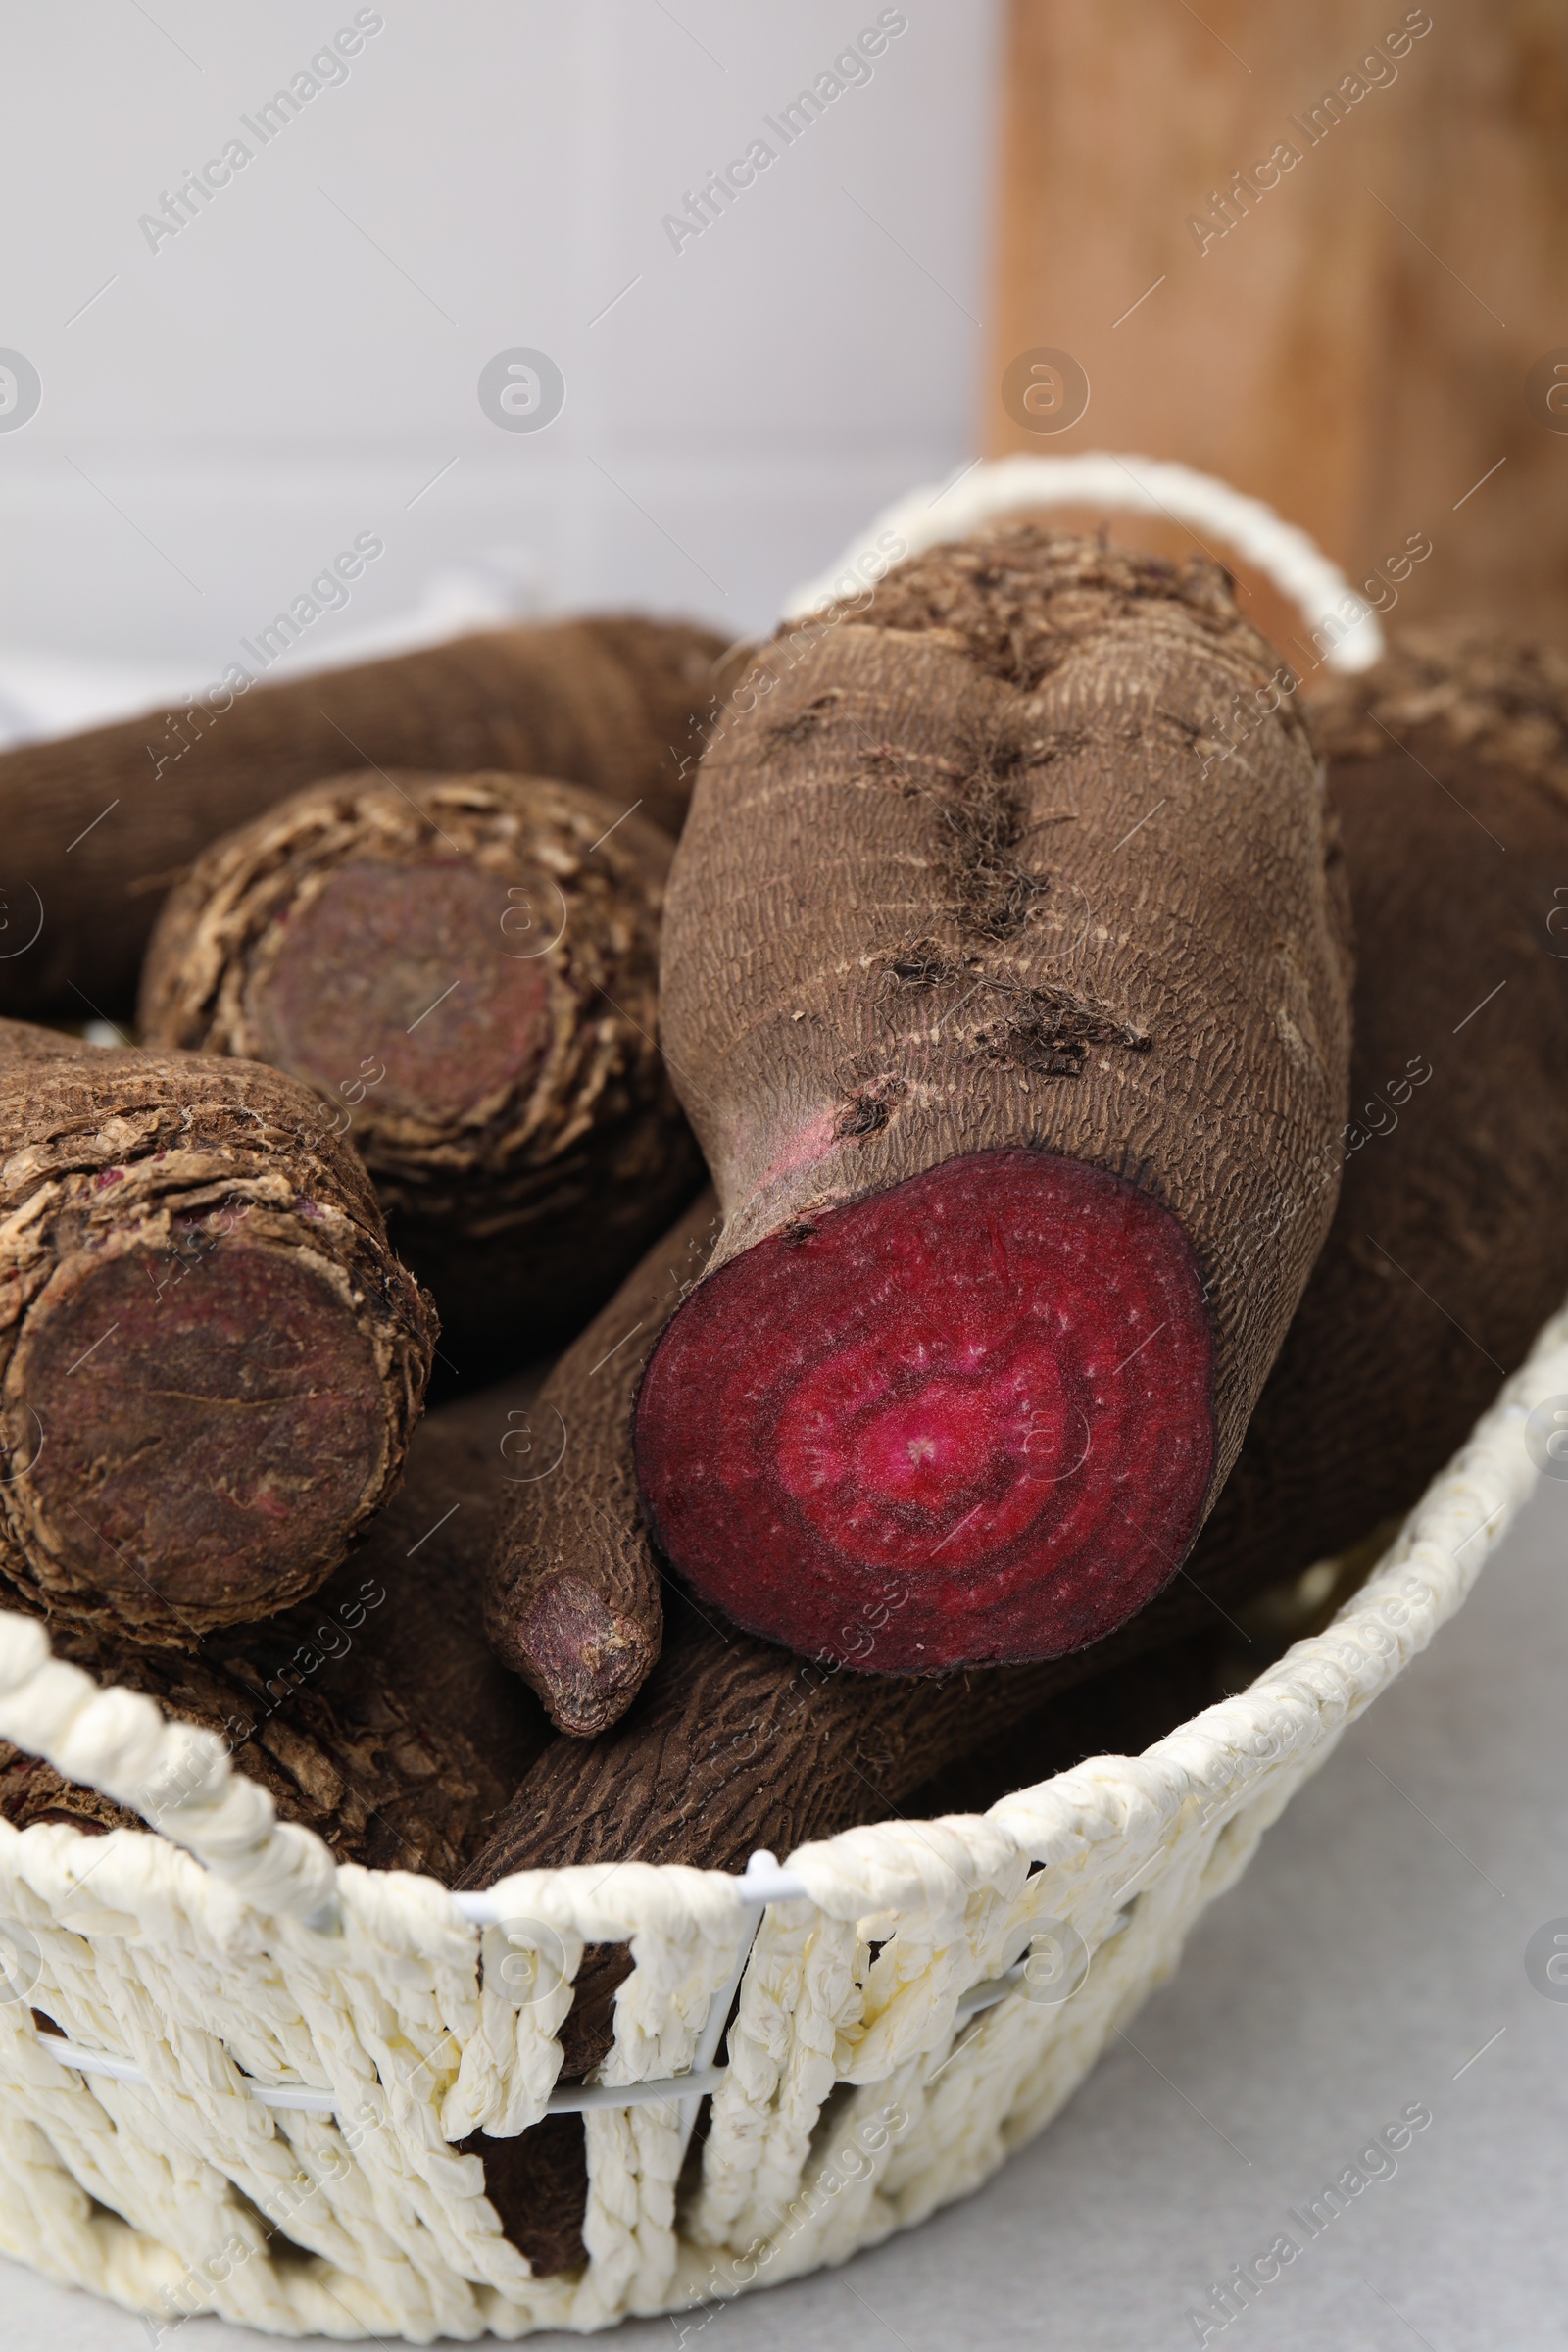 Photo of Whole and cut red beets in basket on table, closeup